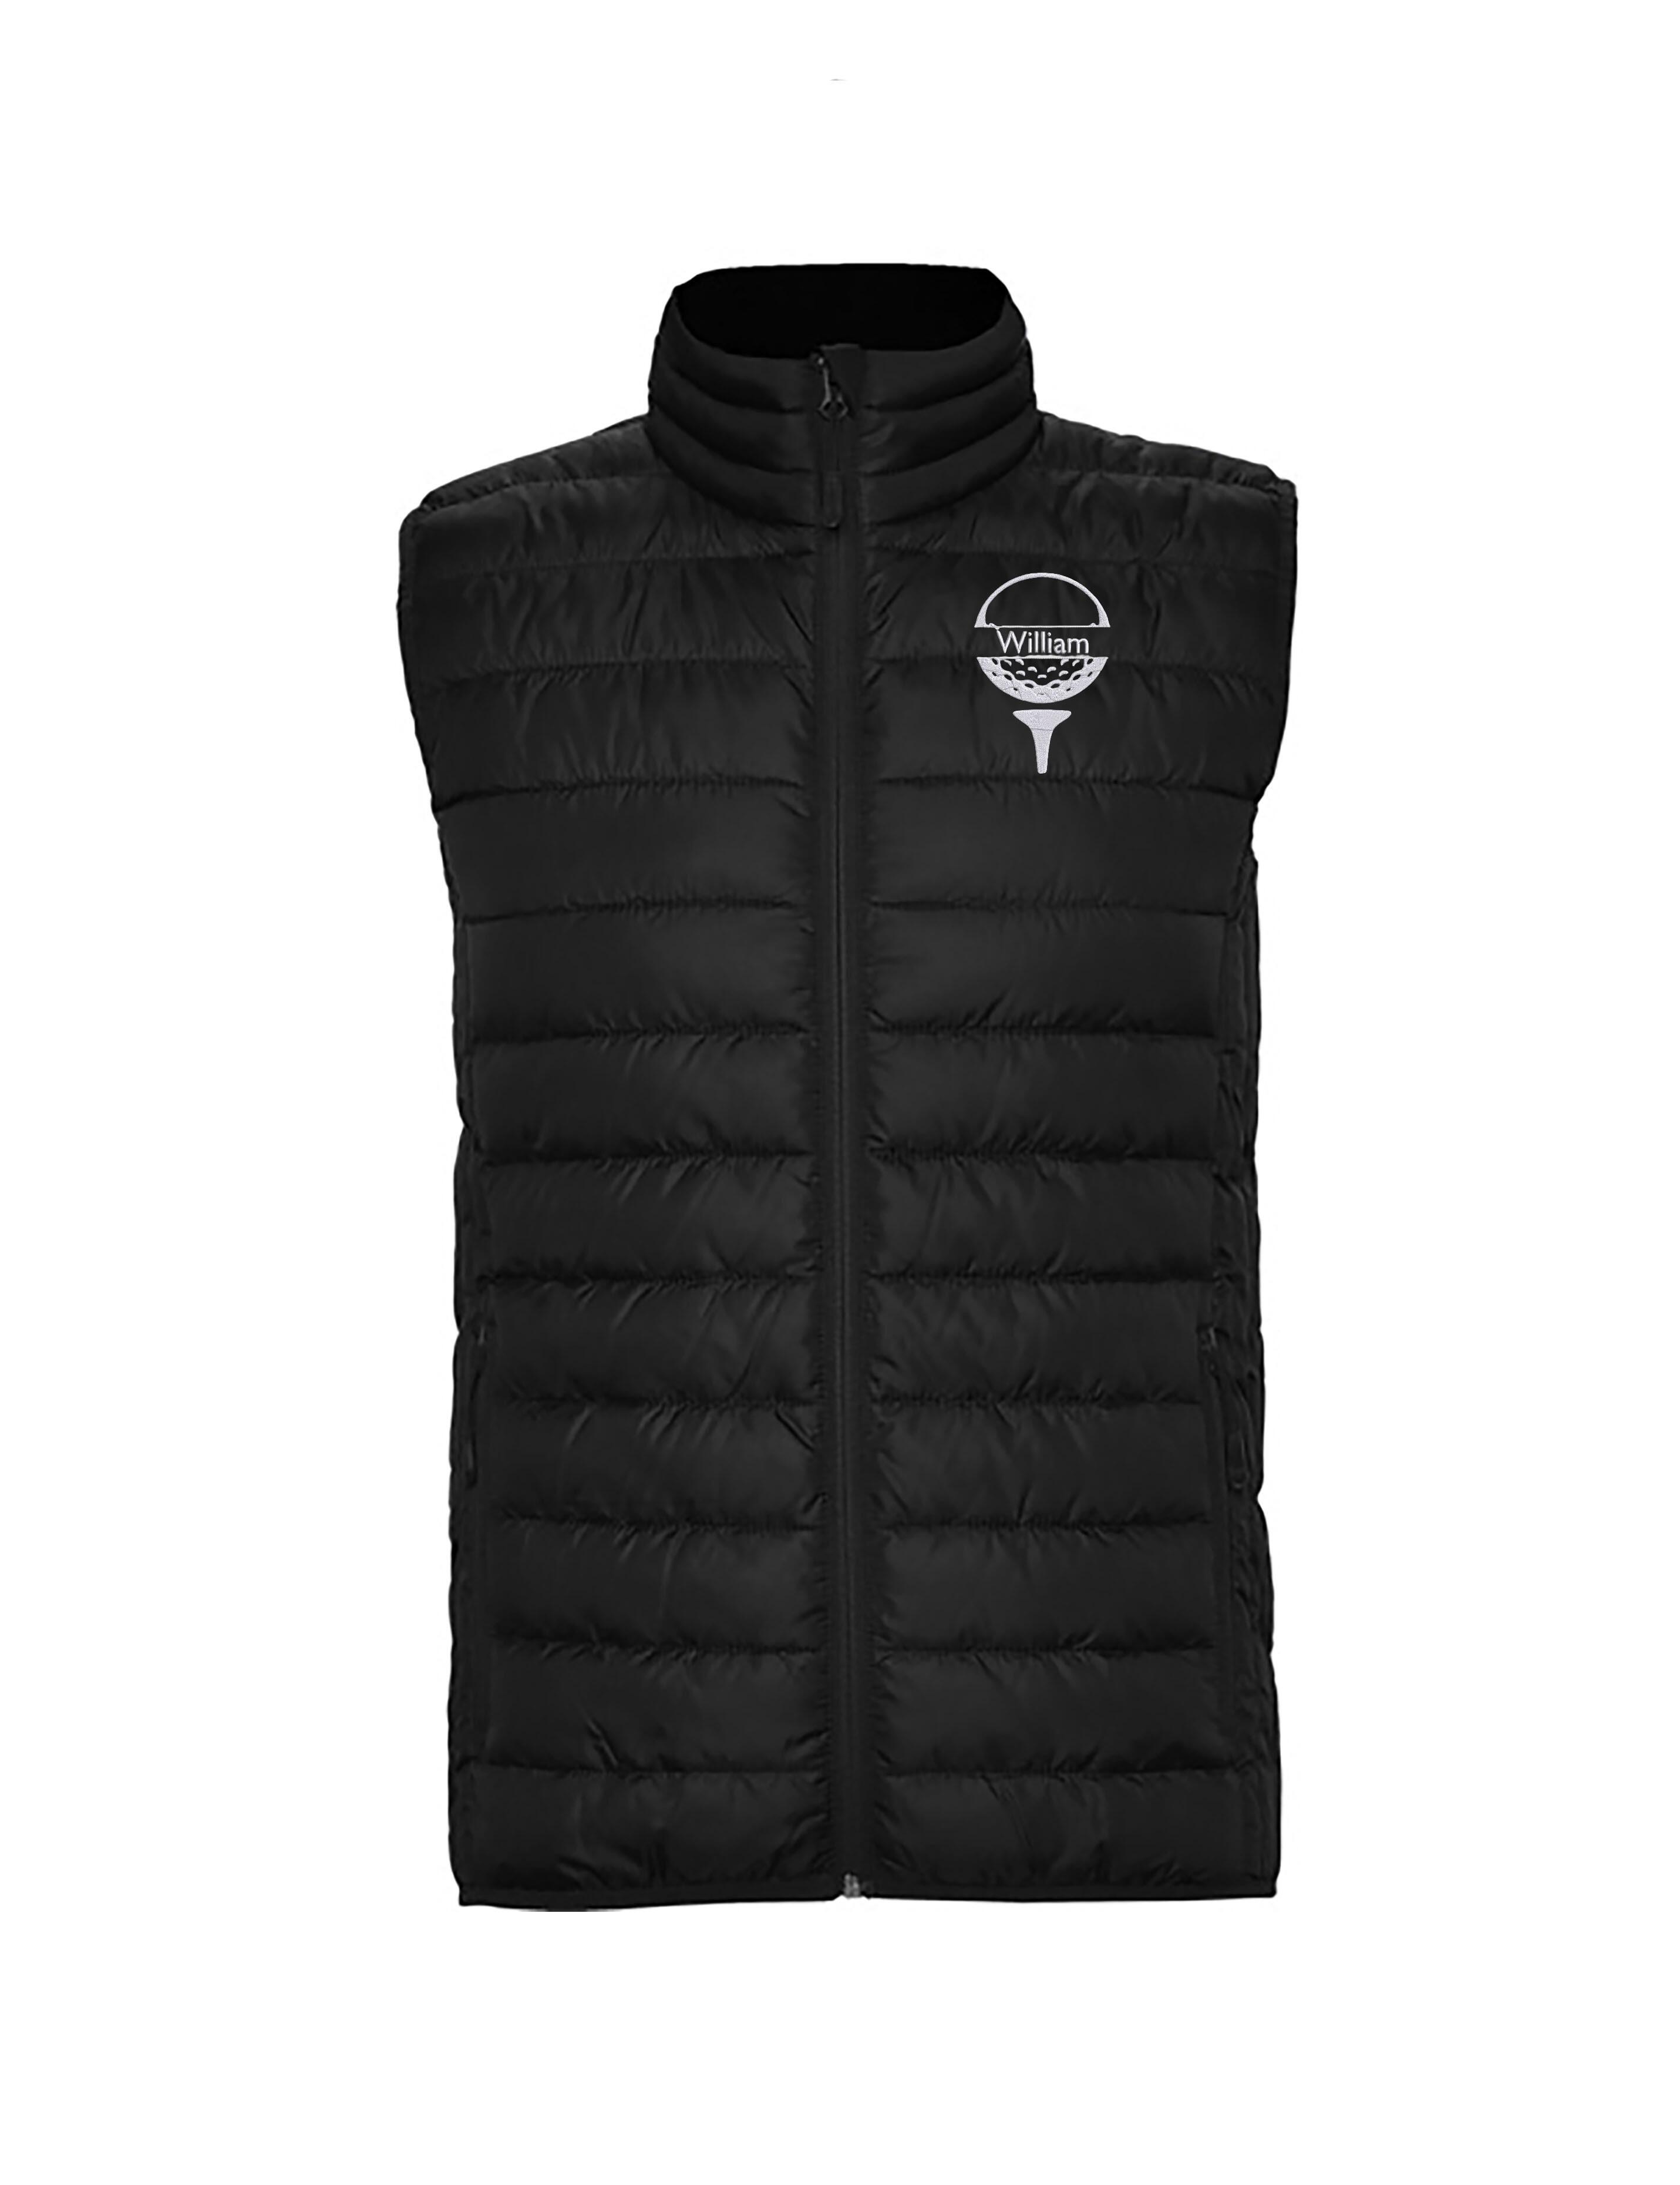 Golf Ball Design Embroidered Feather Golf Gilet Black